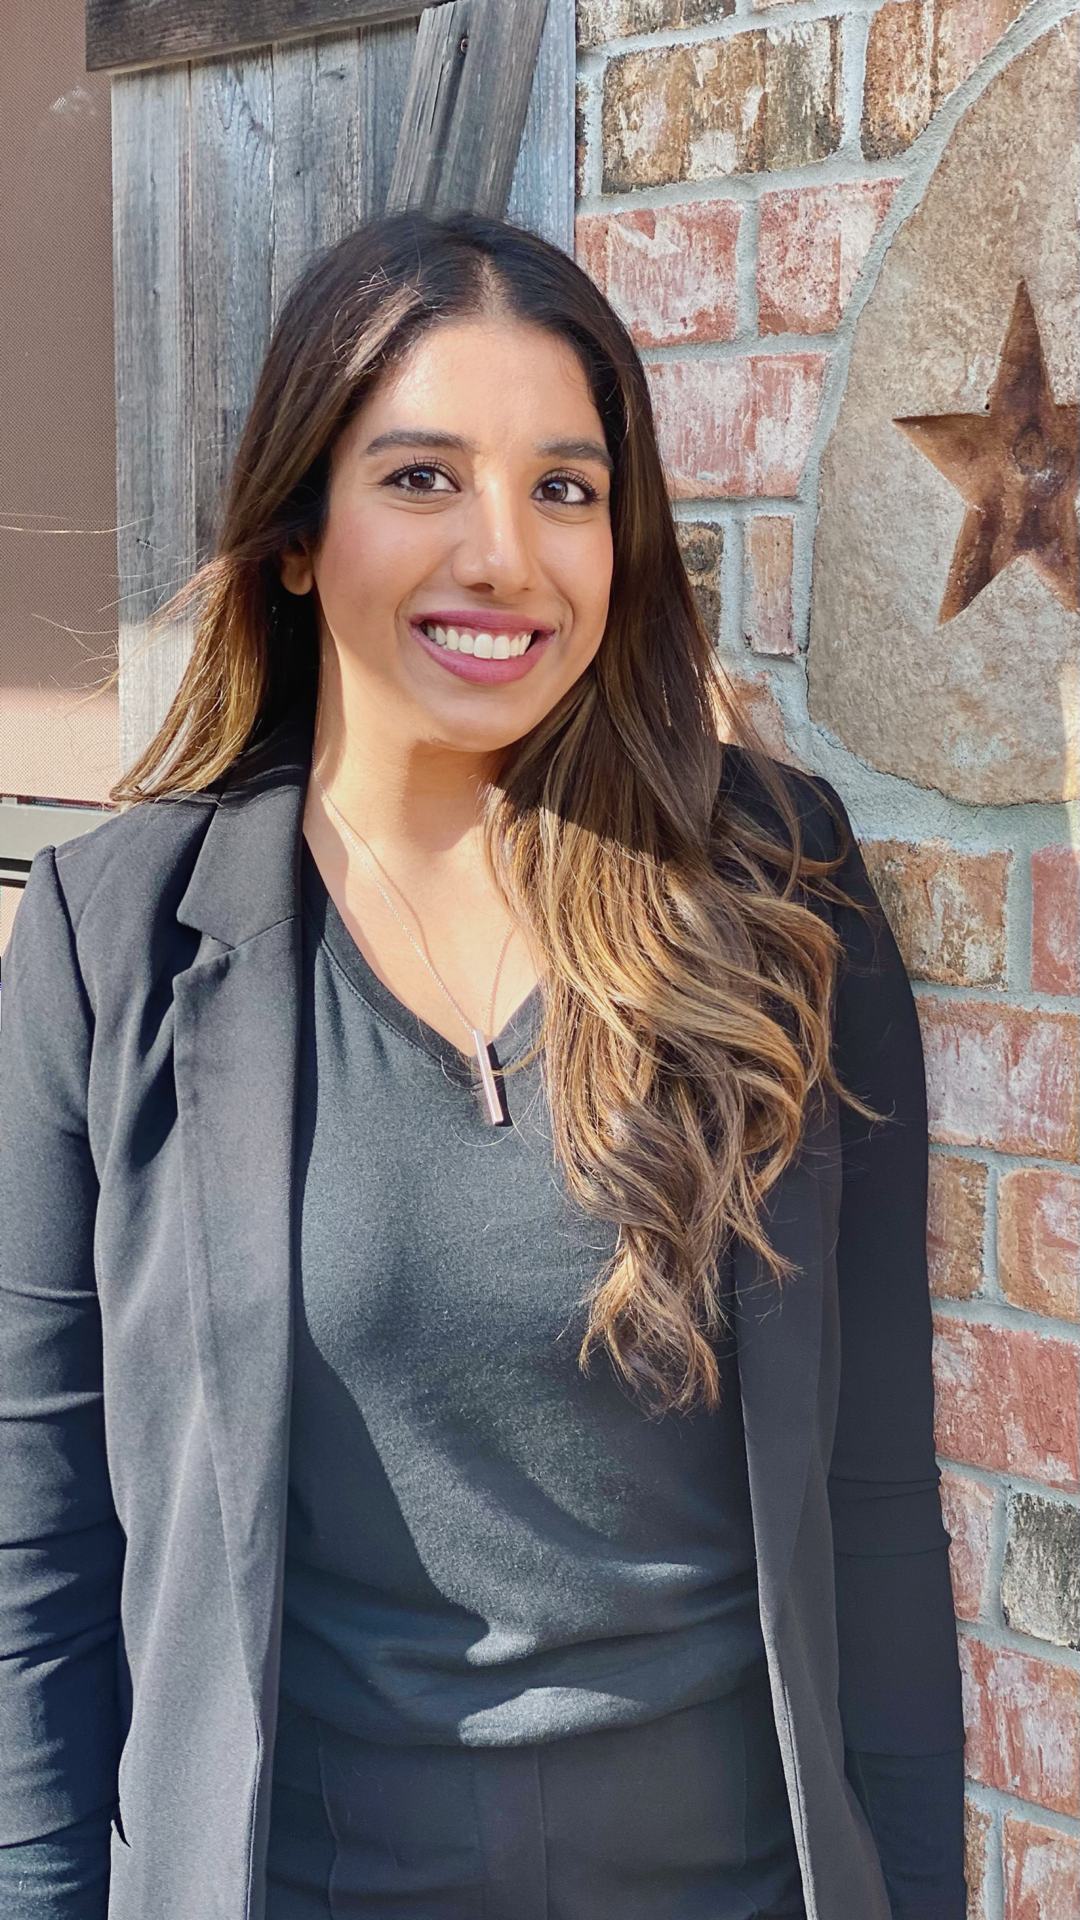 COMMUNITY SPOTLIGHT: Tejal Patel named new Female Director of Asian American Hotel Owners Association